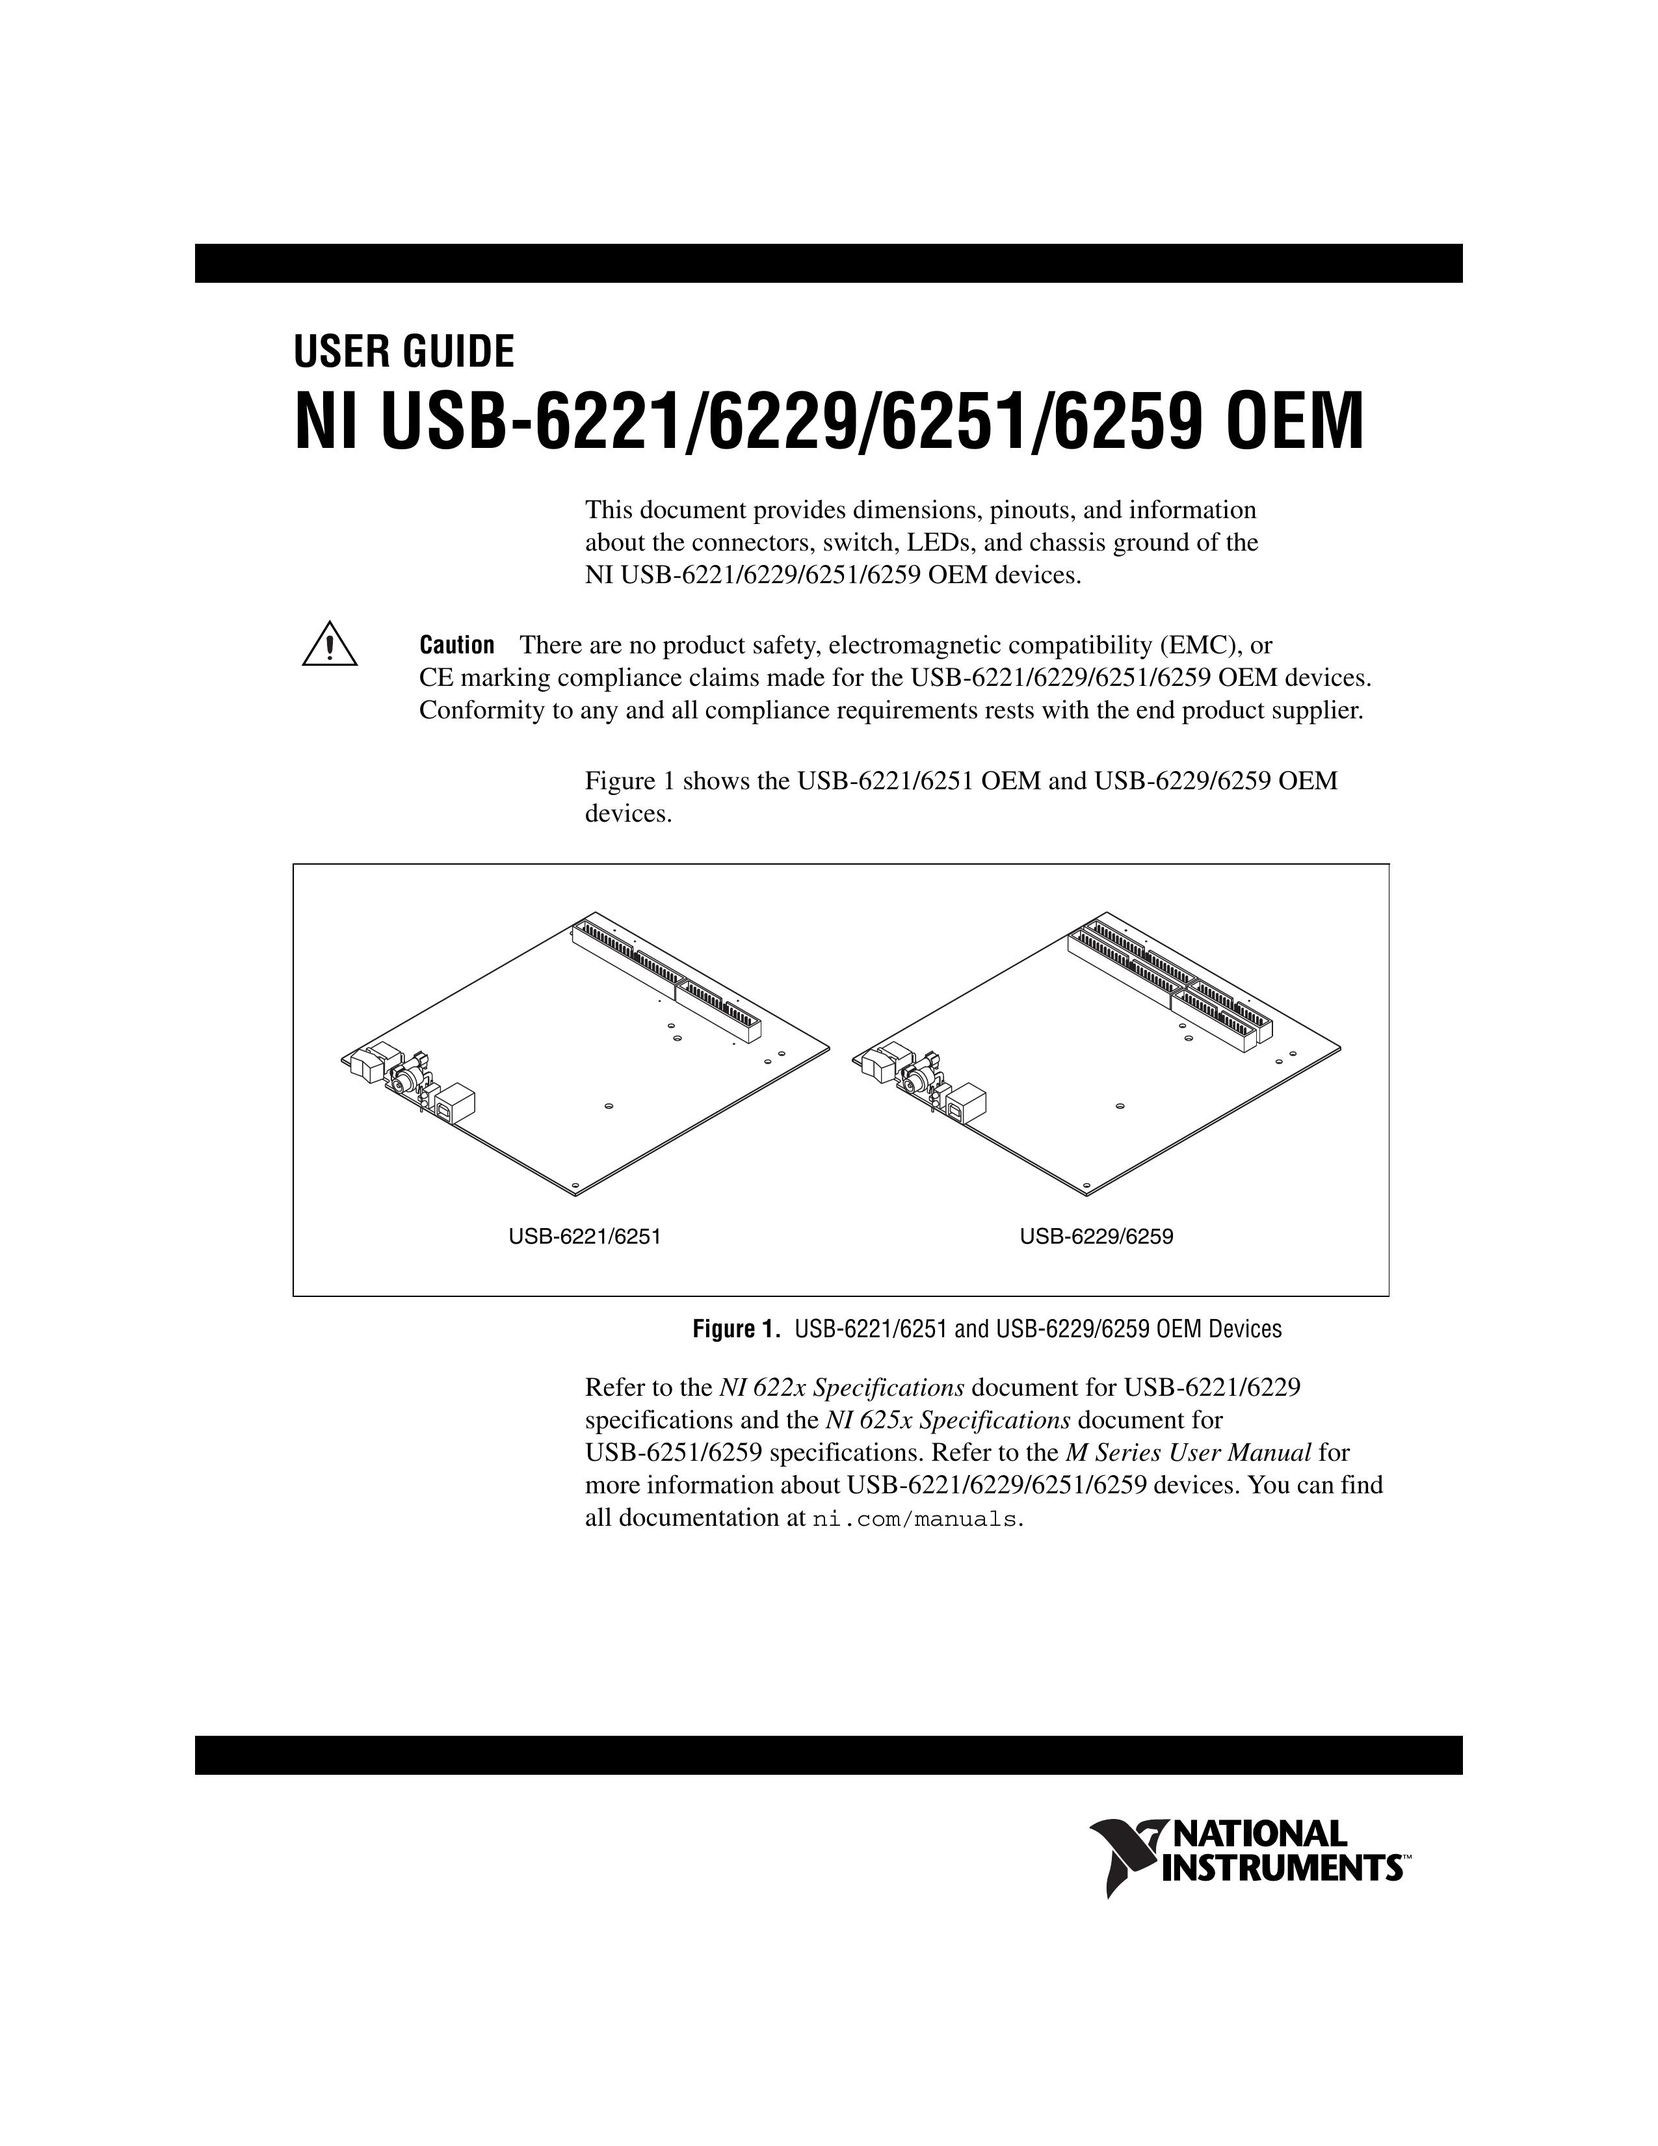 National Instruments NI USB-6229 Switch User Manual